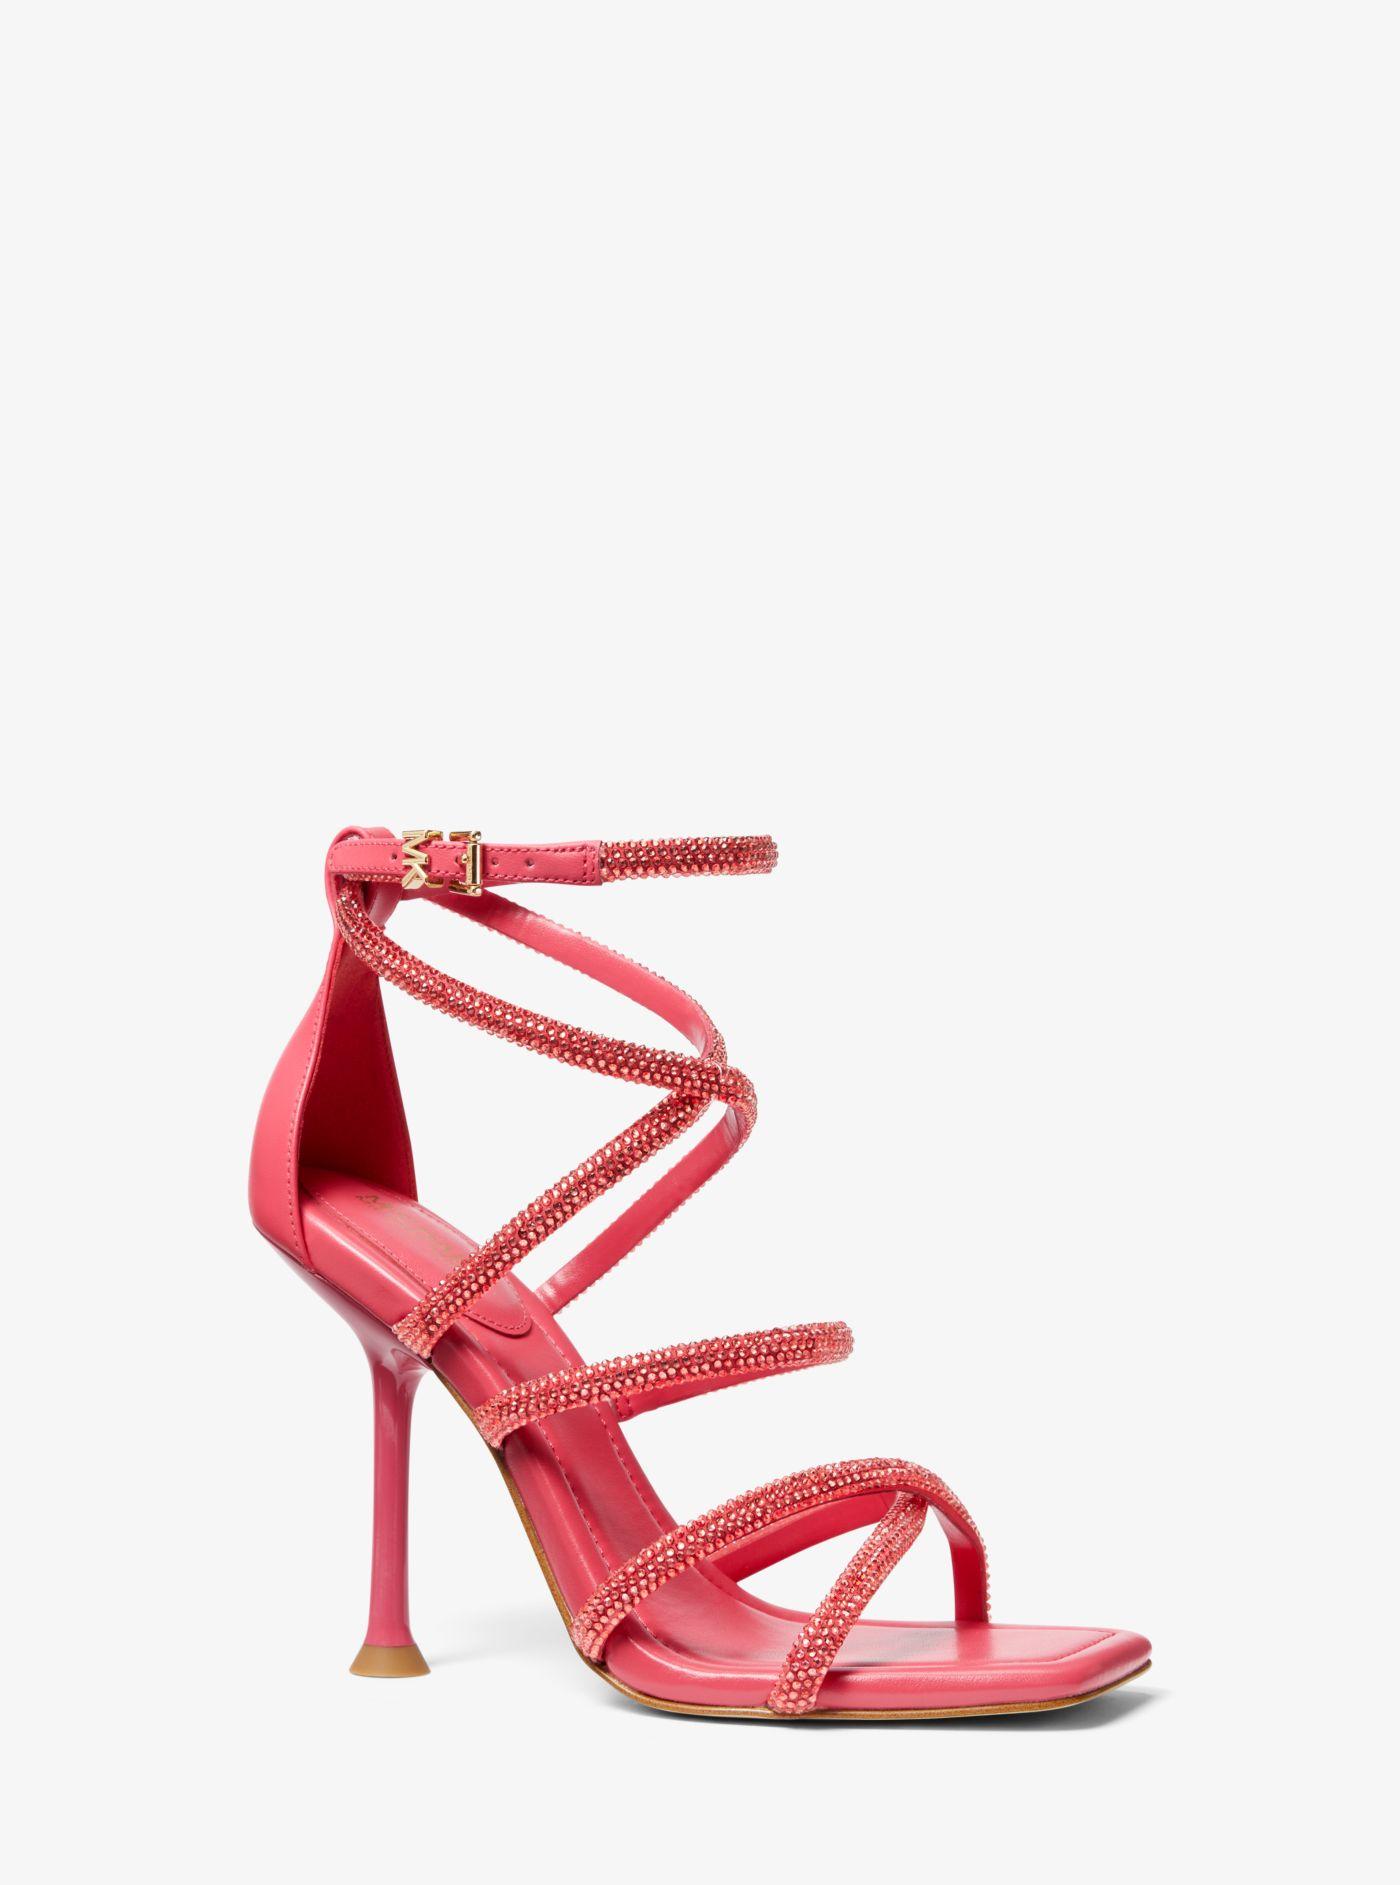 Michael Kors Imani Embellished Scuba And Faux Leather Sandal in Red | Lyst